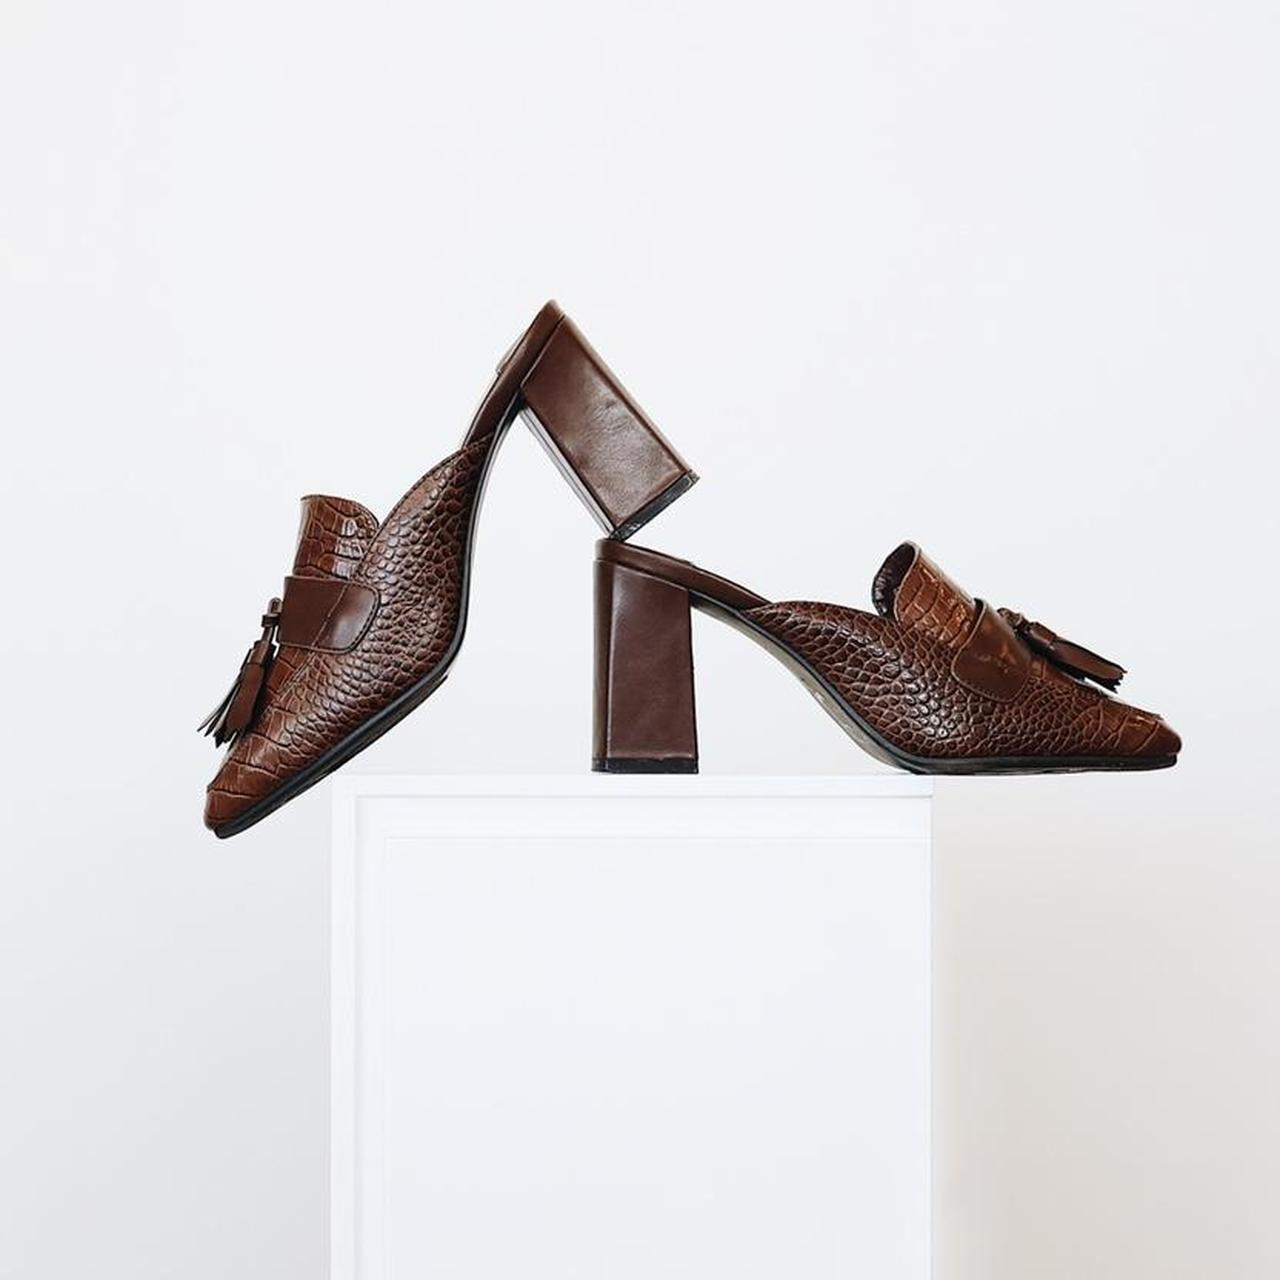 Product Image 1 - Brown Leather Mules

* If you